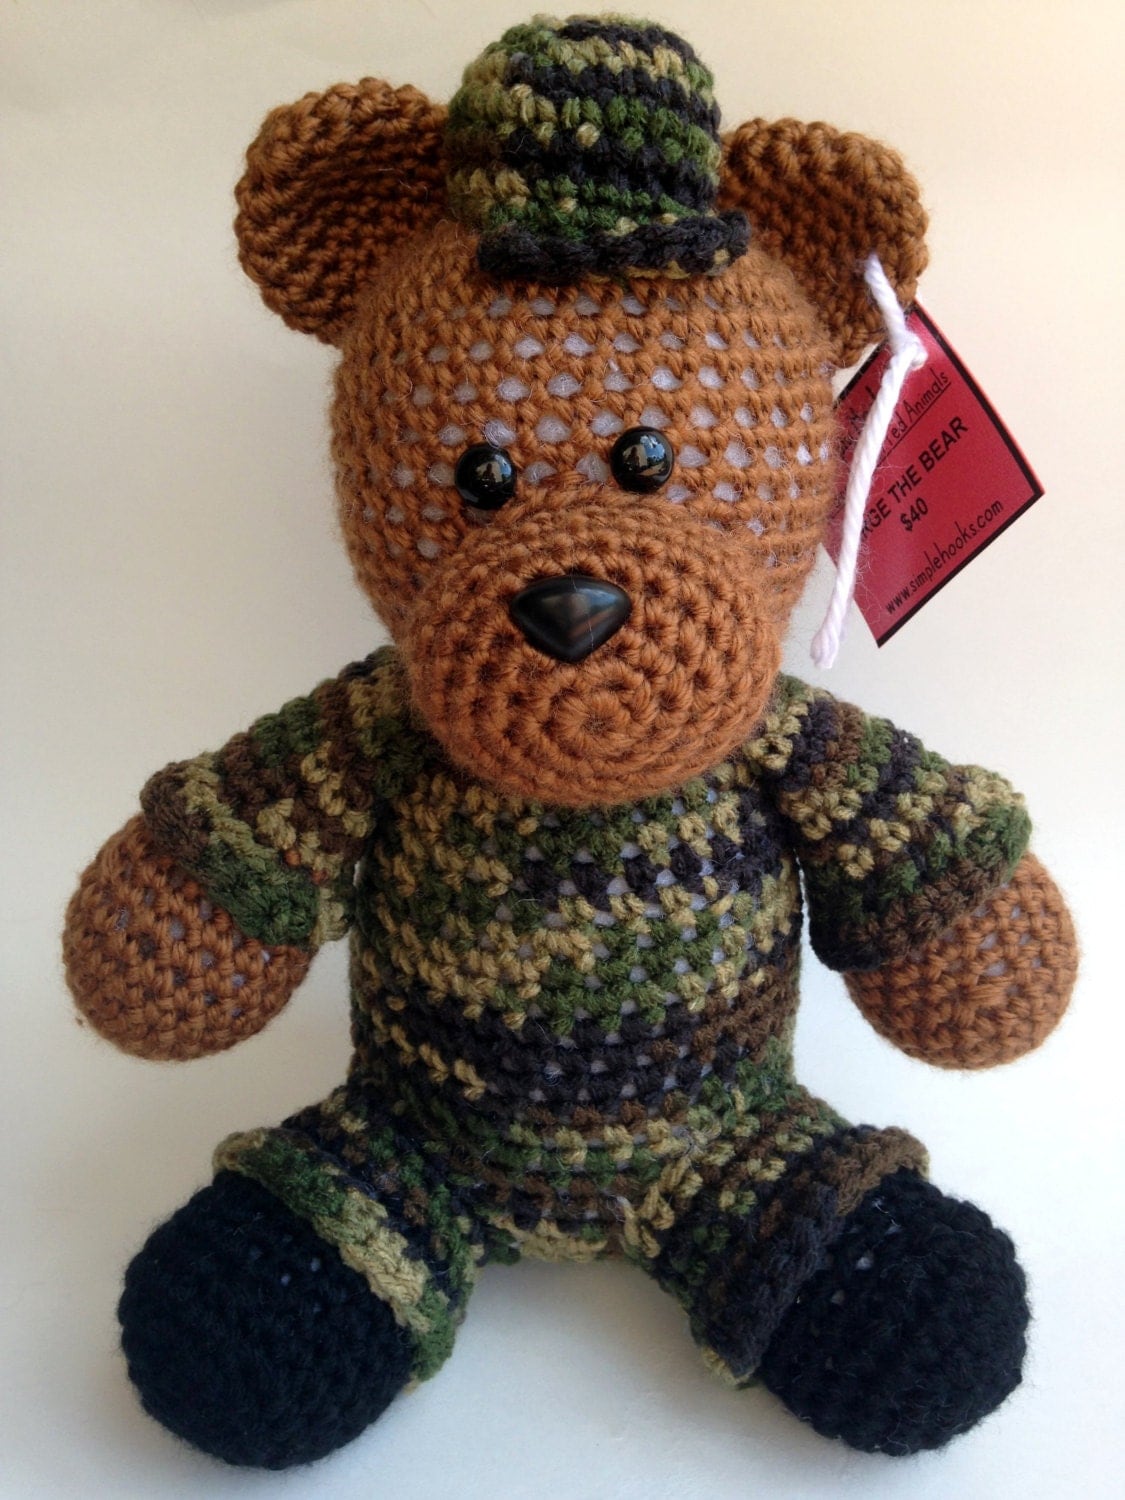 Military Army Bear Stuffed Animal Crochet Army by TheSimplyHooked